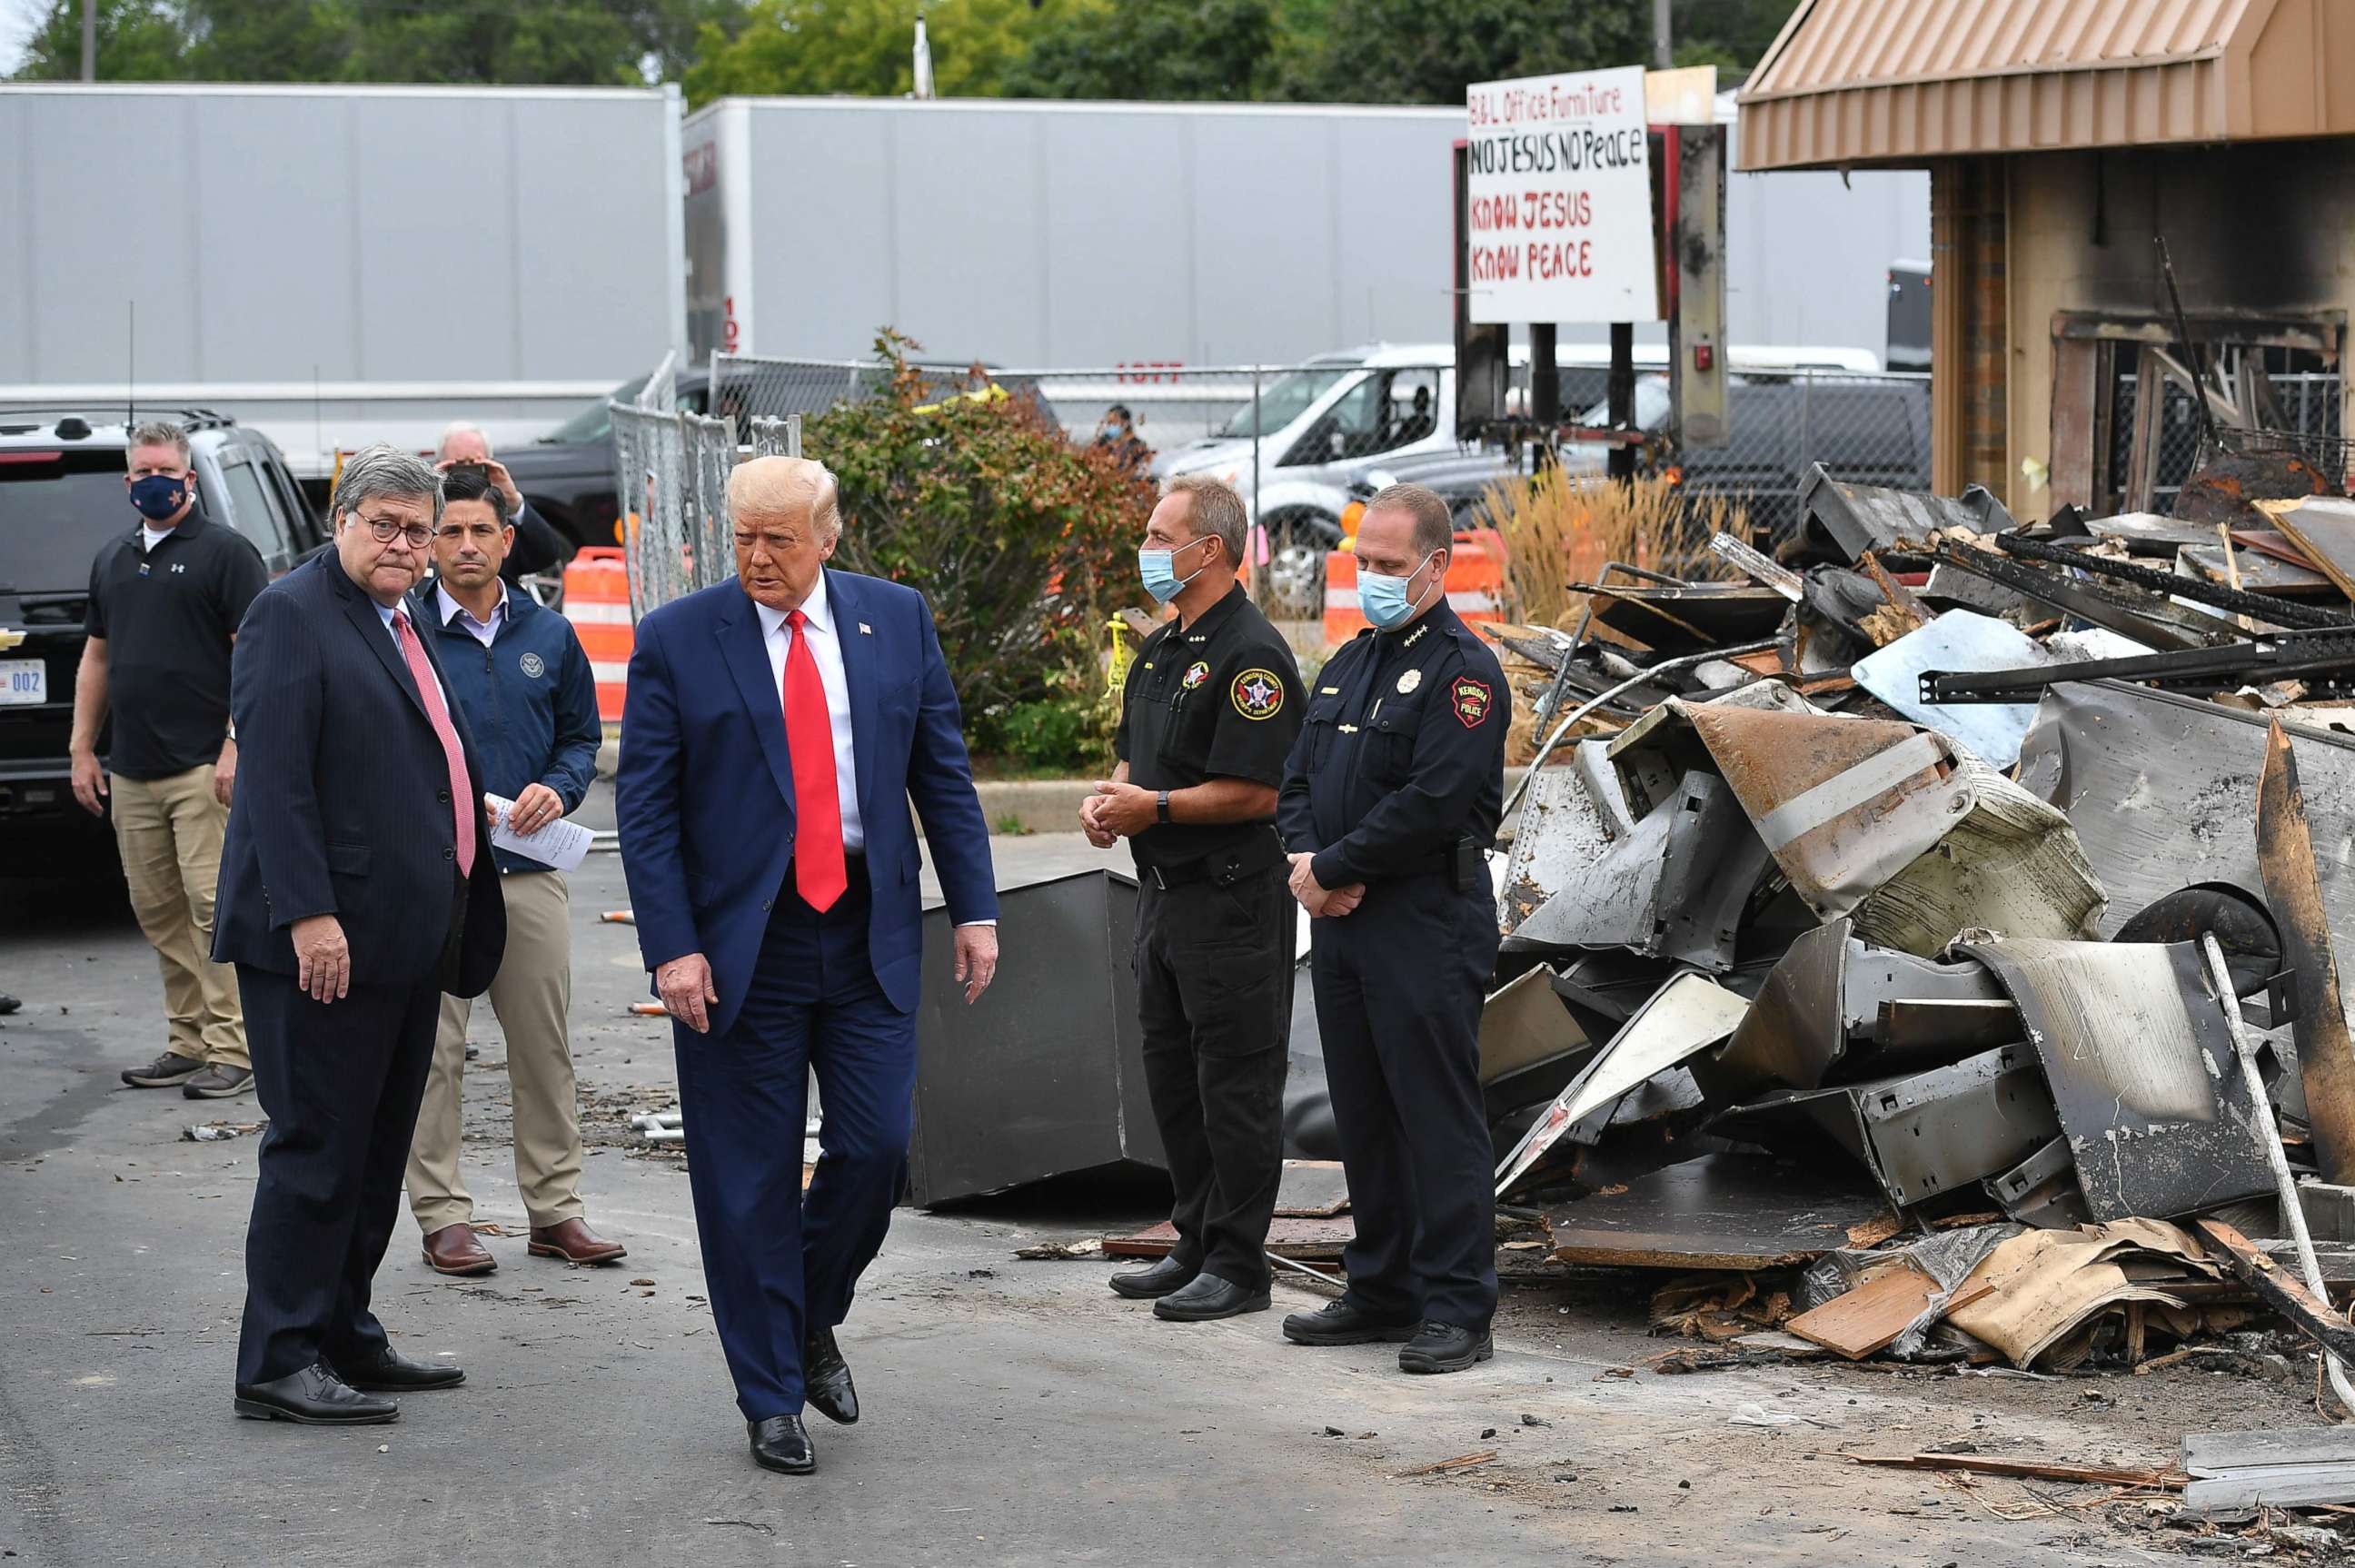 PHOTO: President Donald Trump, with Attorney General William Barr and Acting Homeland Security Secretary Chad Wolf, tours an area affected by civil unrest in Kenosha, Wisconsin, Sept. 1, 2020.